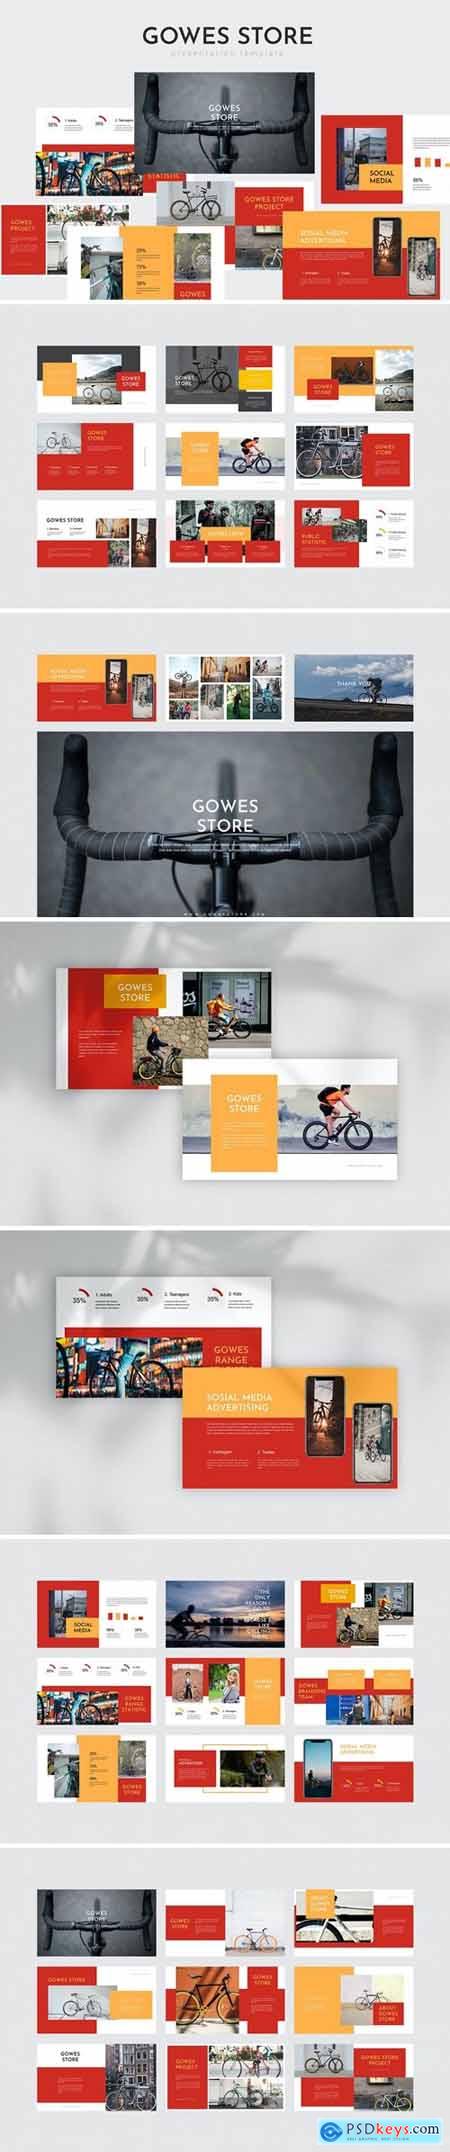 Gowes Store - Powerpoint Template